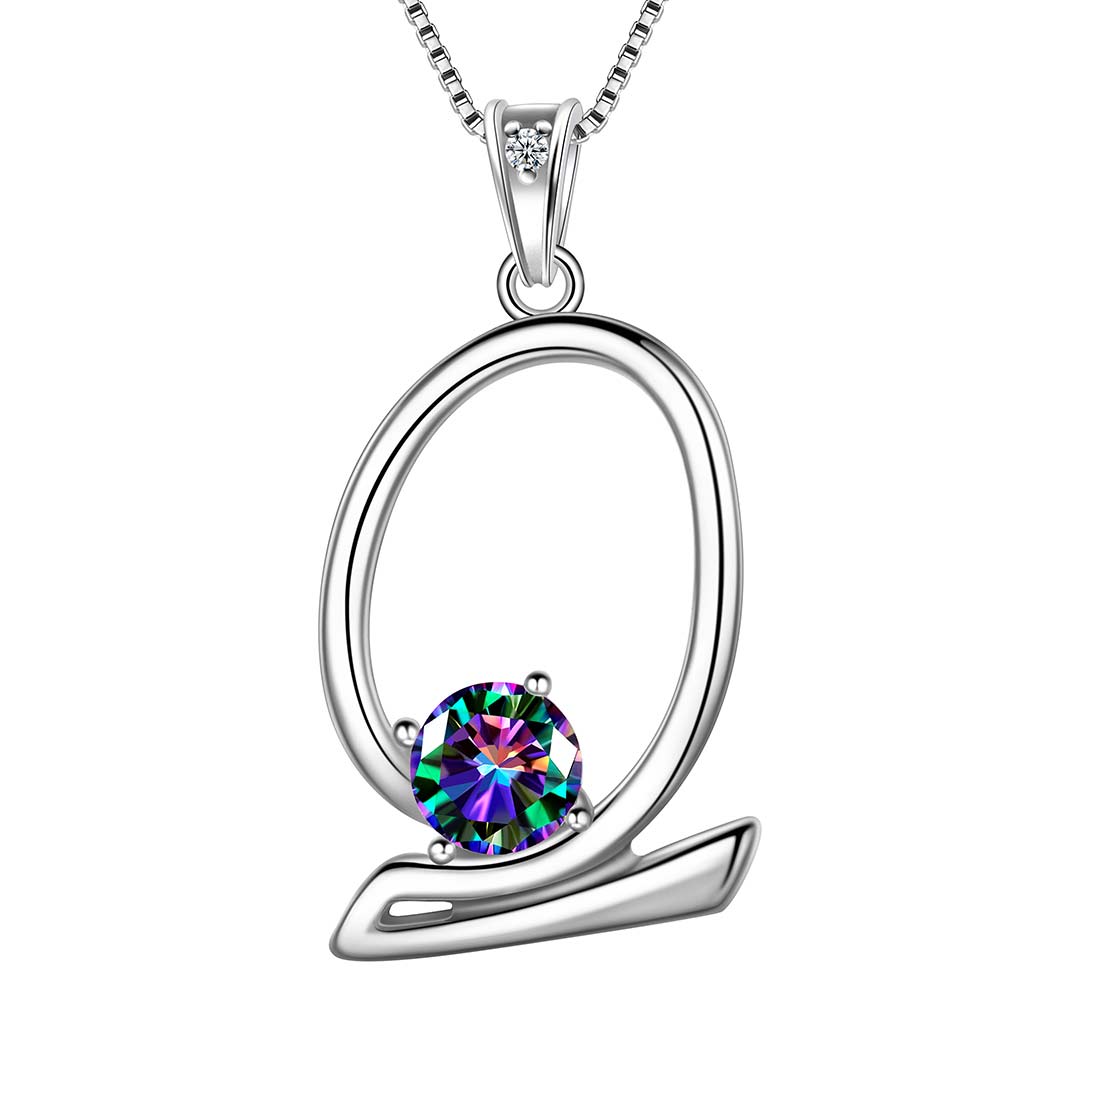 Women Letter Q Initial Necklaces Sterling Silver - Necklaces - Aurora Tears Jewelry